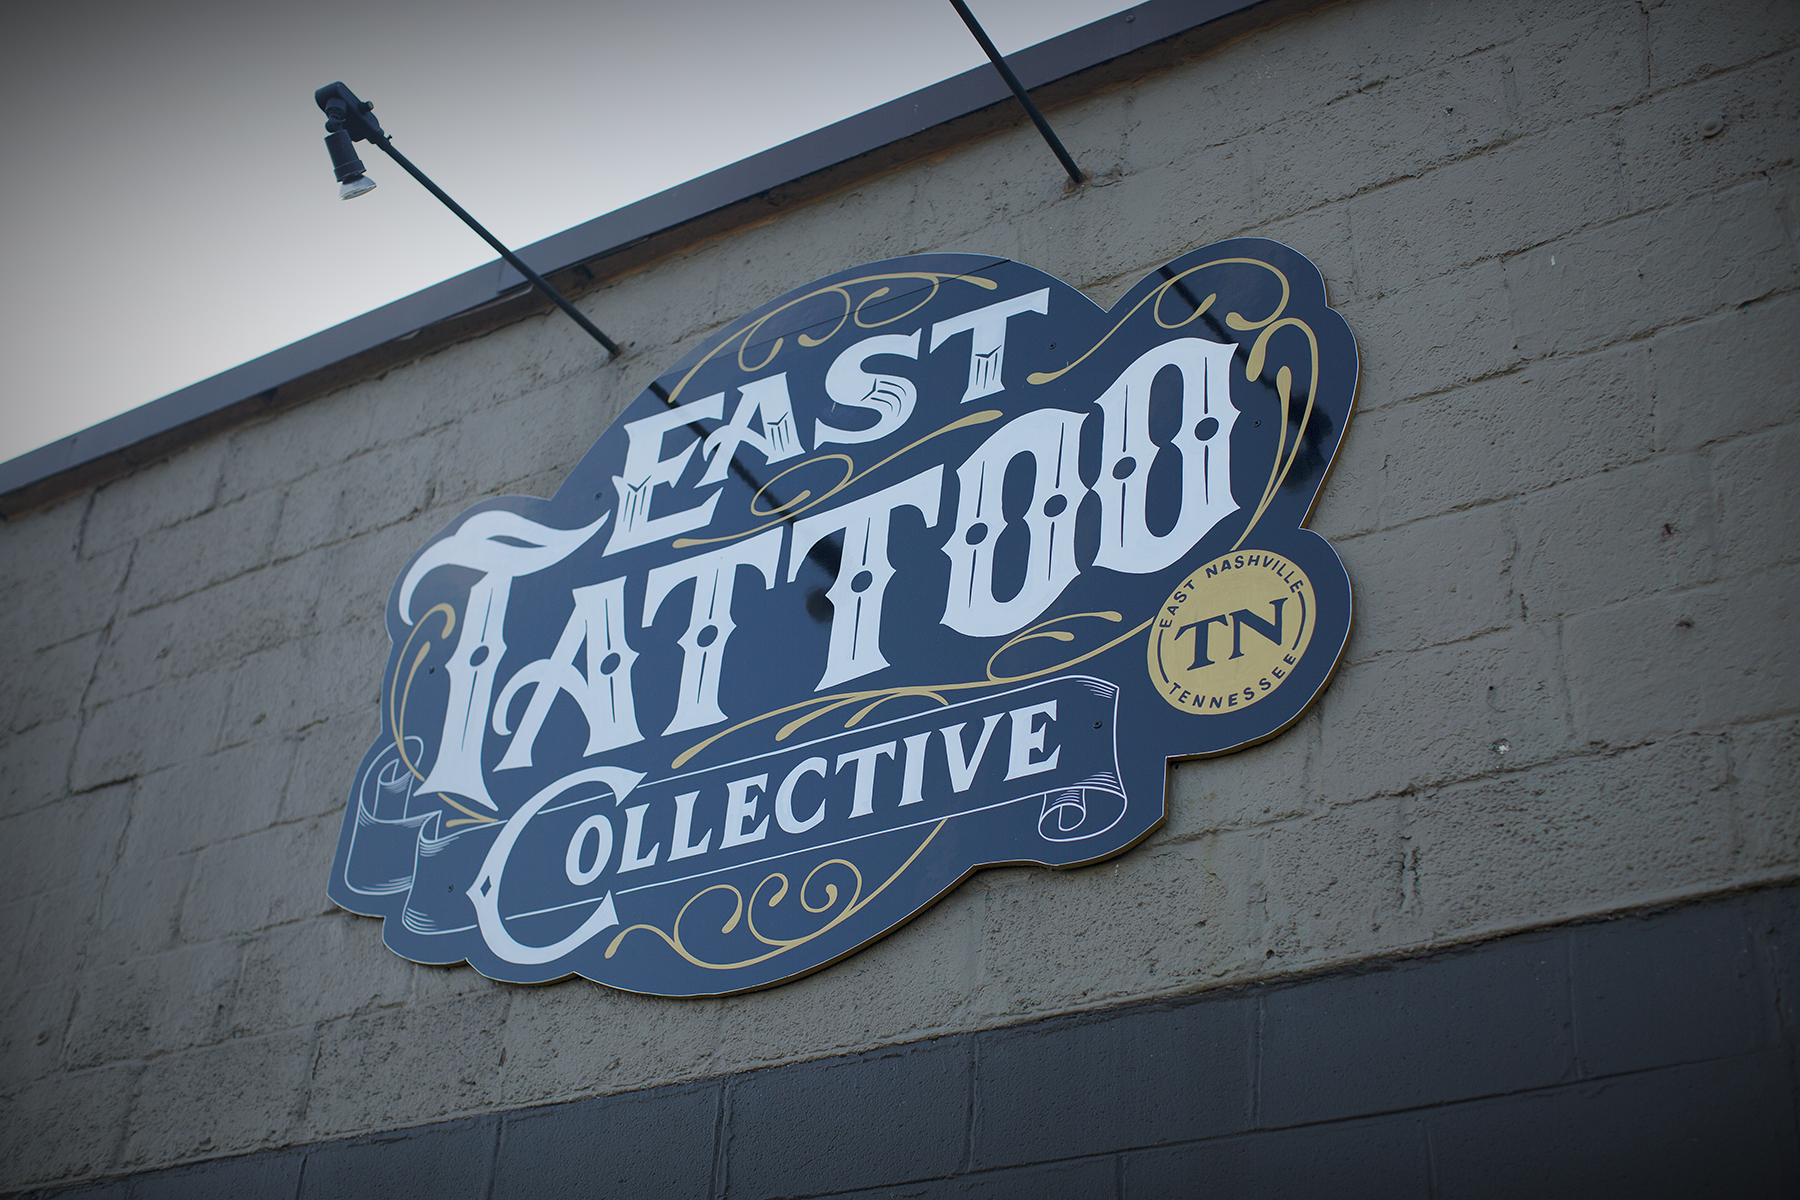 East Tattoo Collective